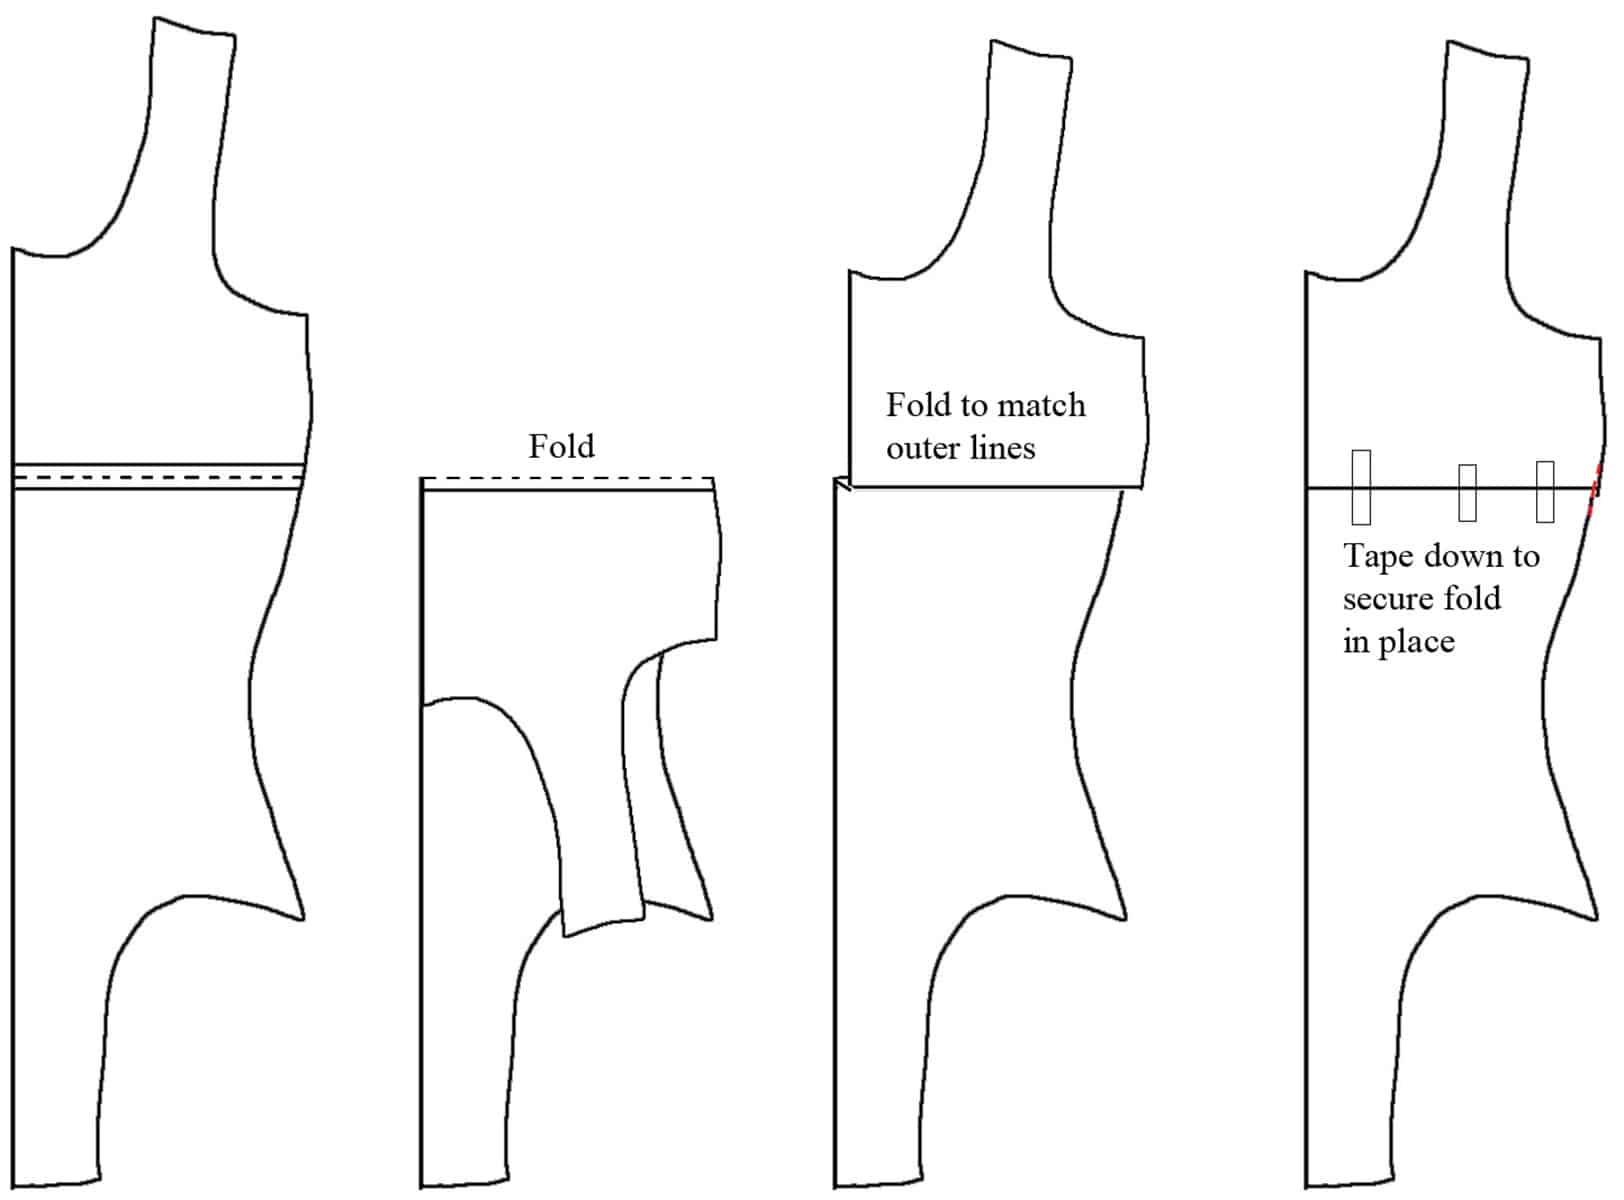 A hand dran diagram showing how to remove length from a pattern.